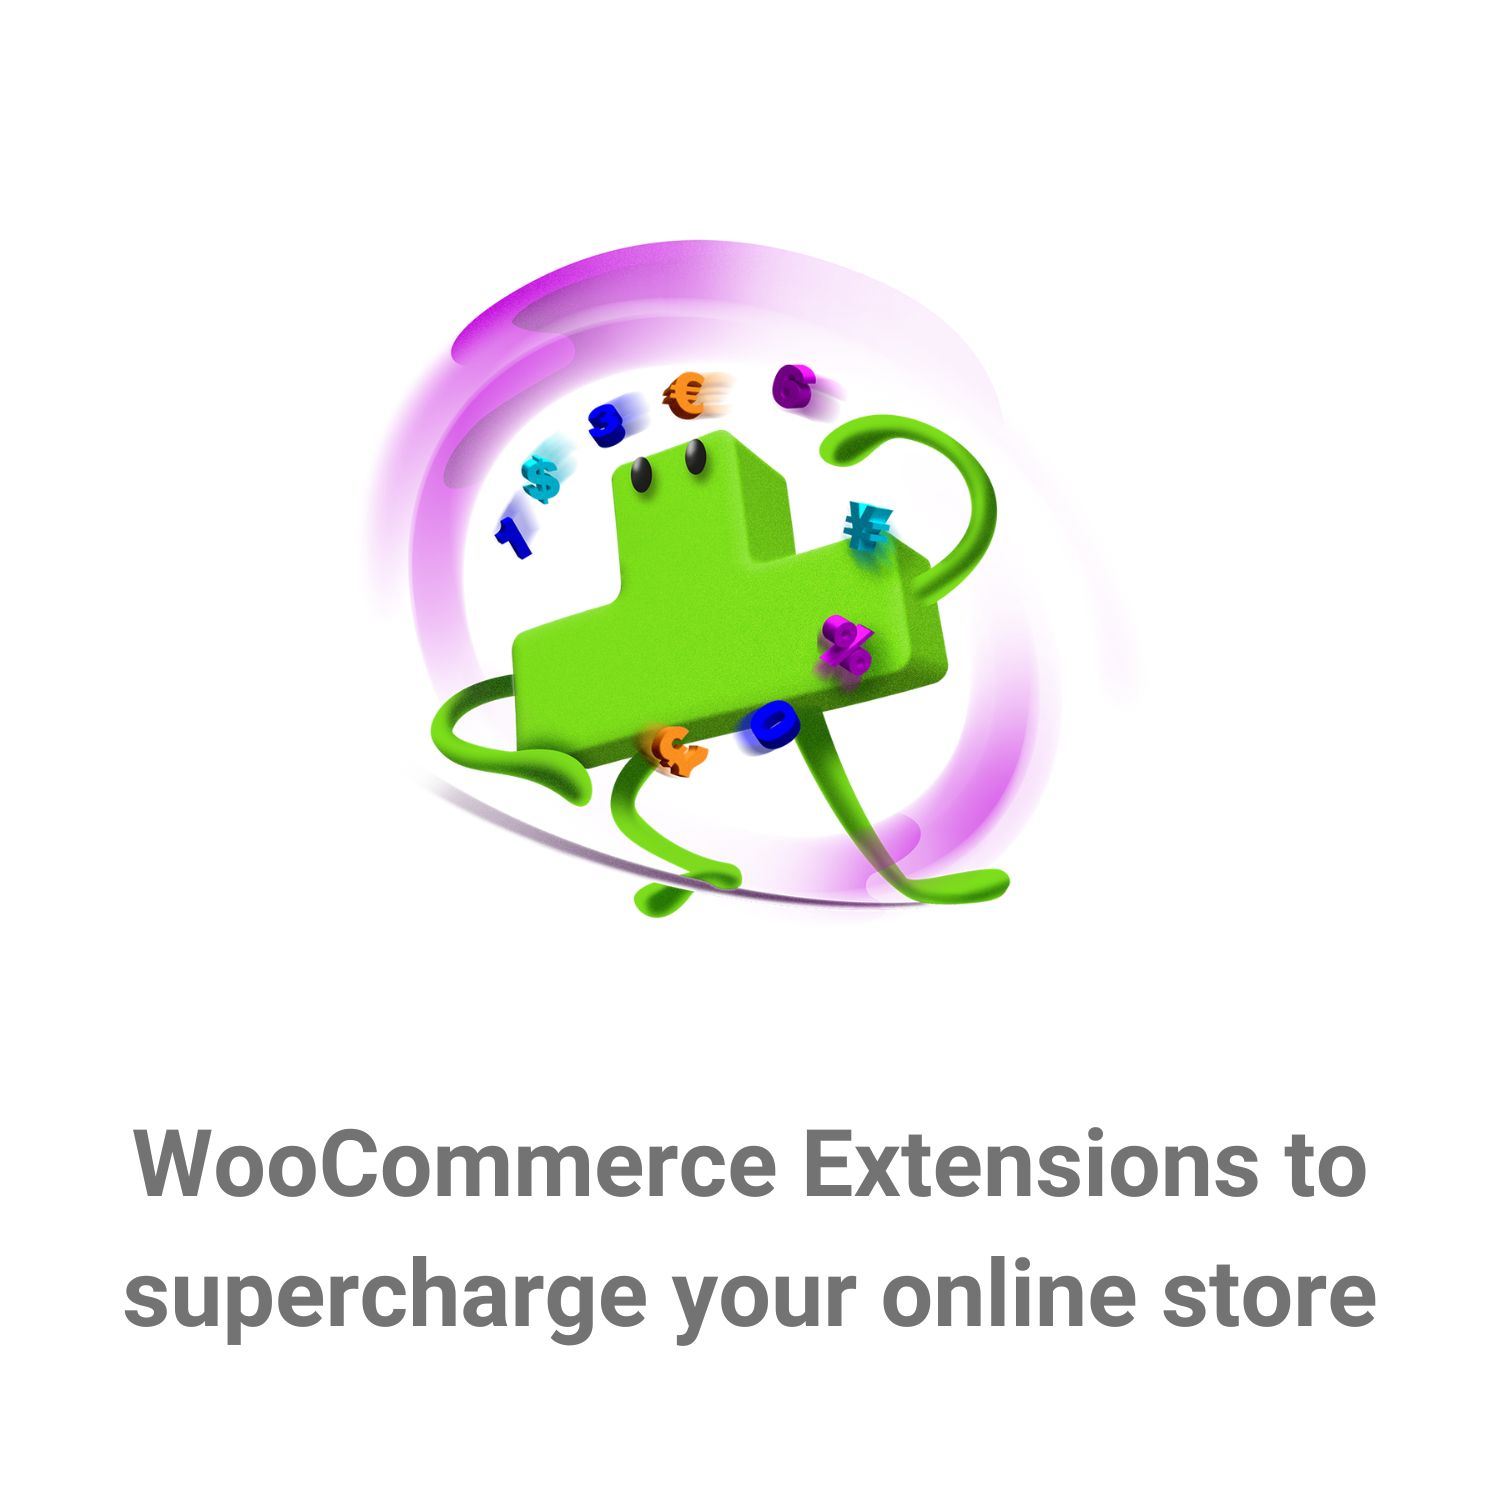 Top WooCommerce extensions to supercharge your online store